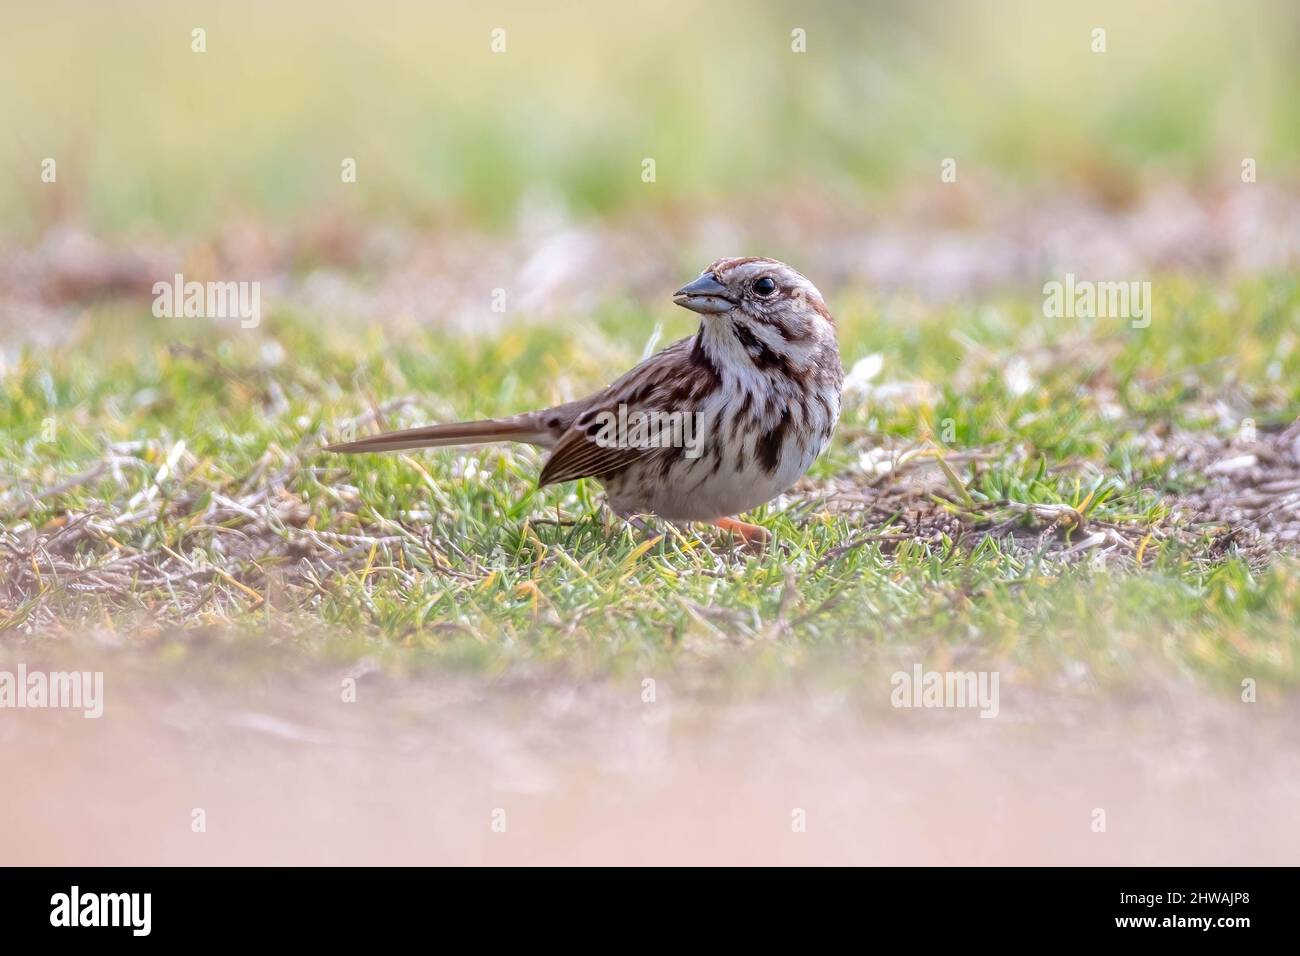 A Song Sparrow (Melospiza melodia) in the grass looking for food. Raleigh, North Carolina. Stock Photo